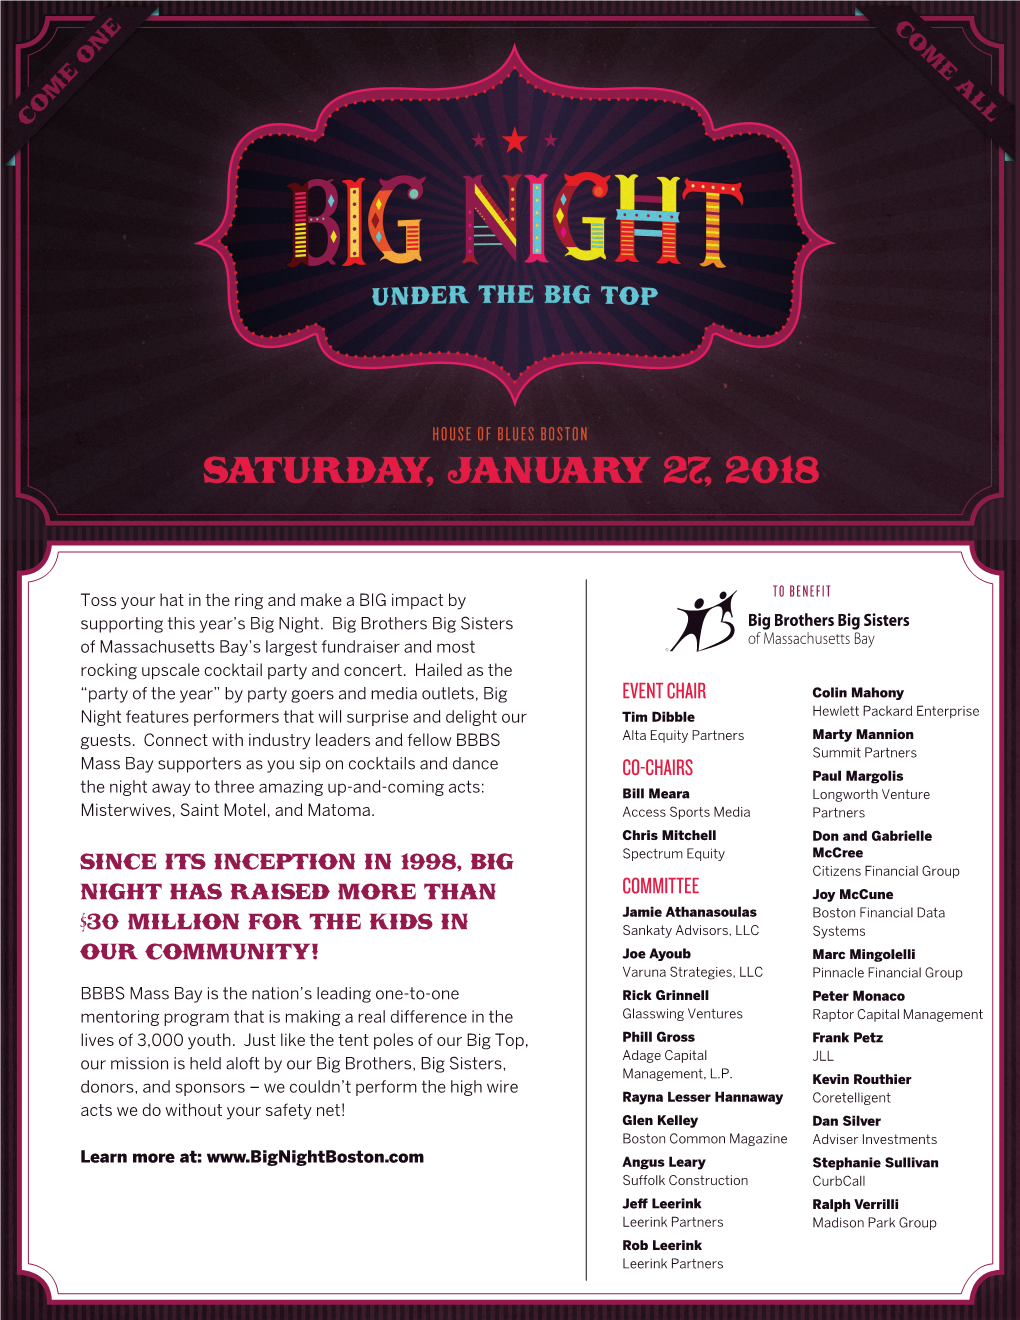 Since Its Inception in 1998, Big Night Has Raised More Than $30